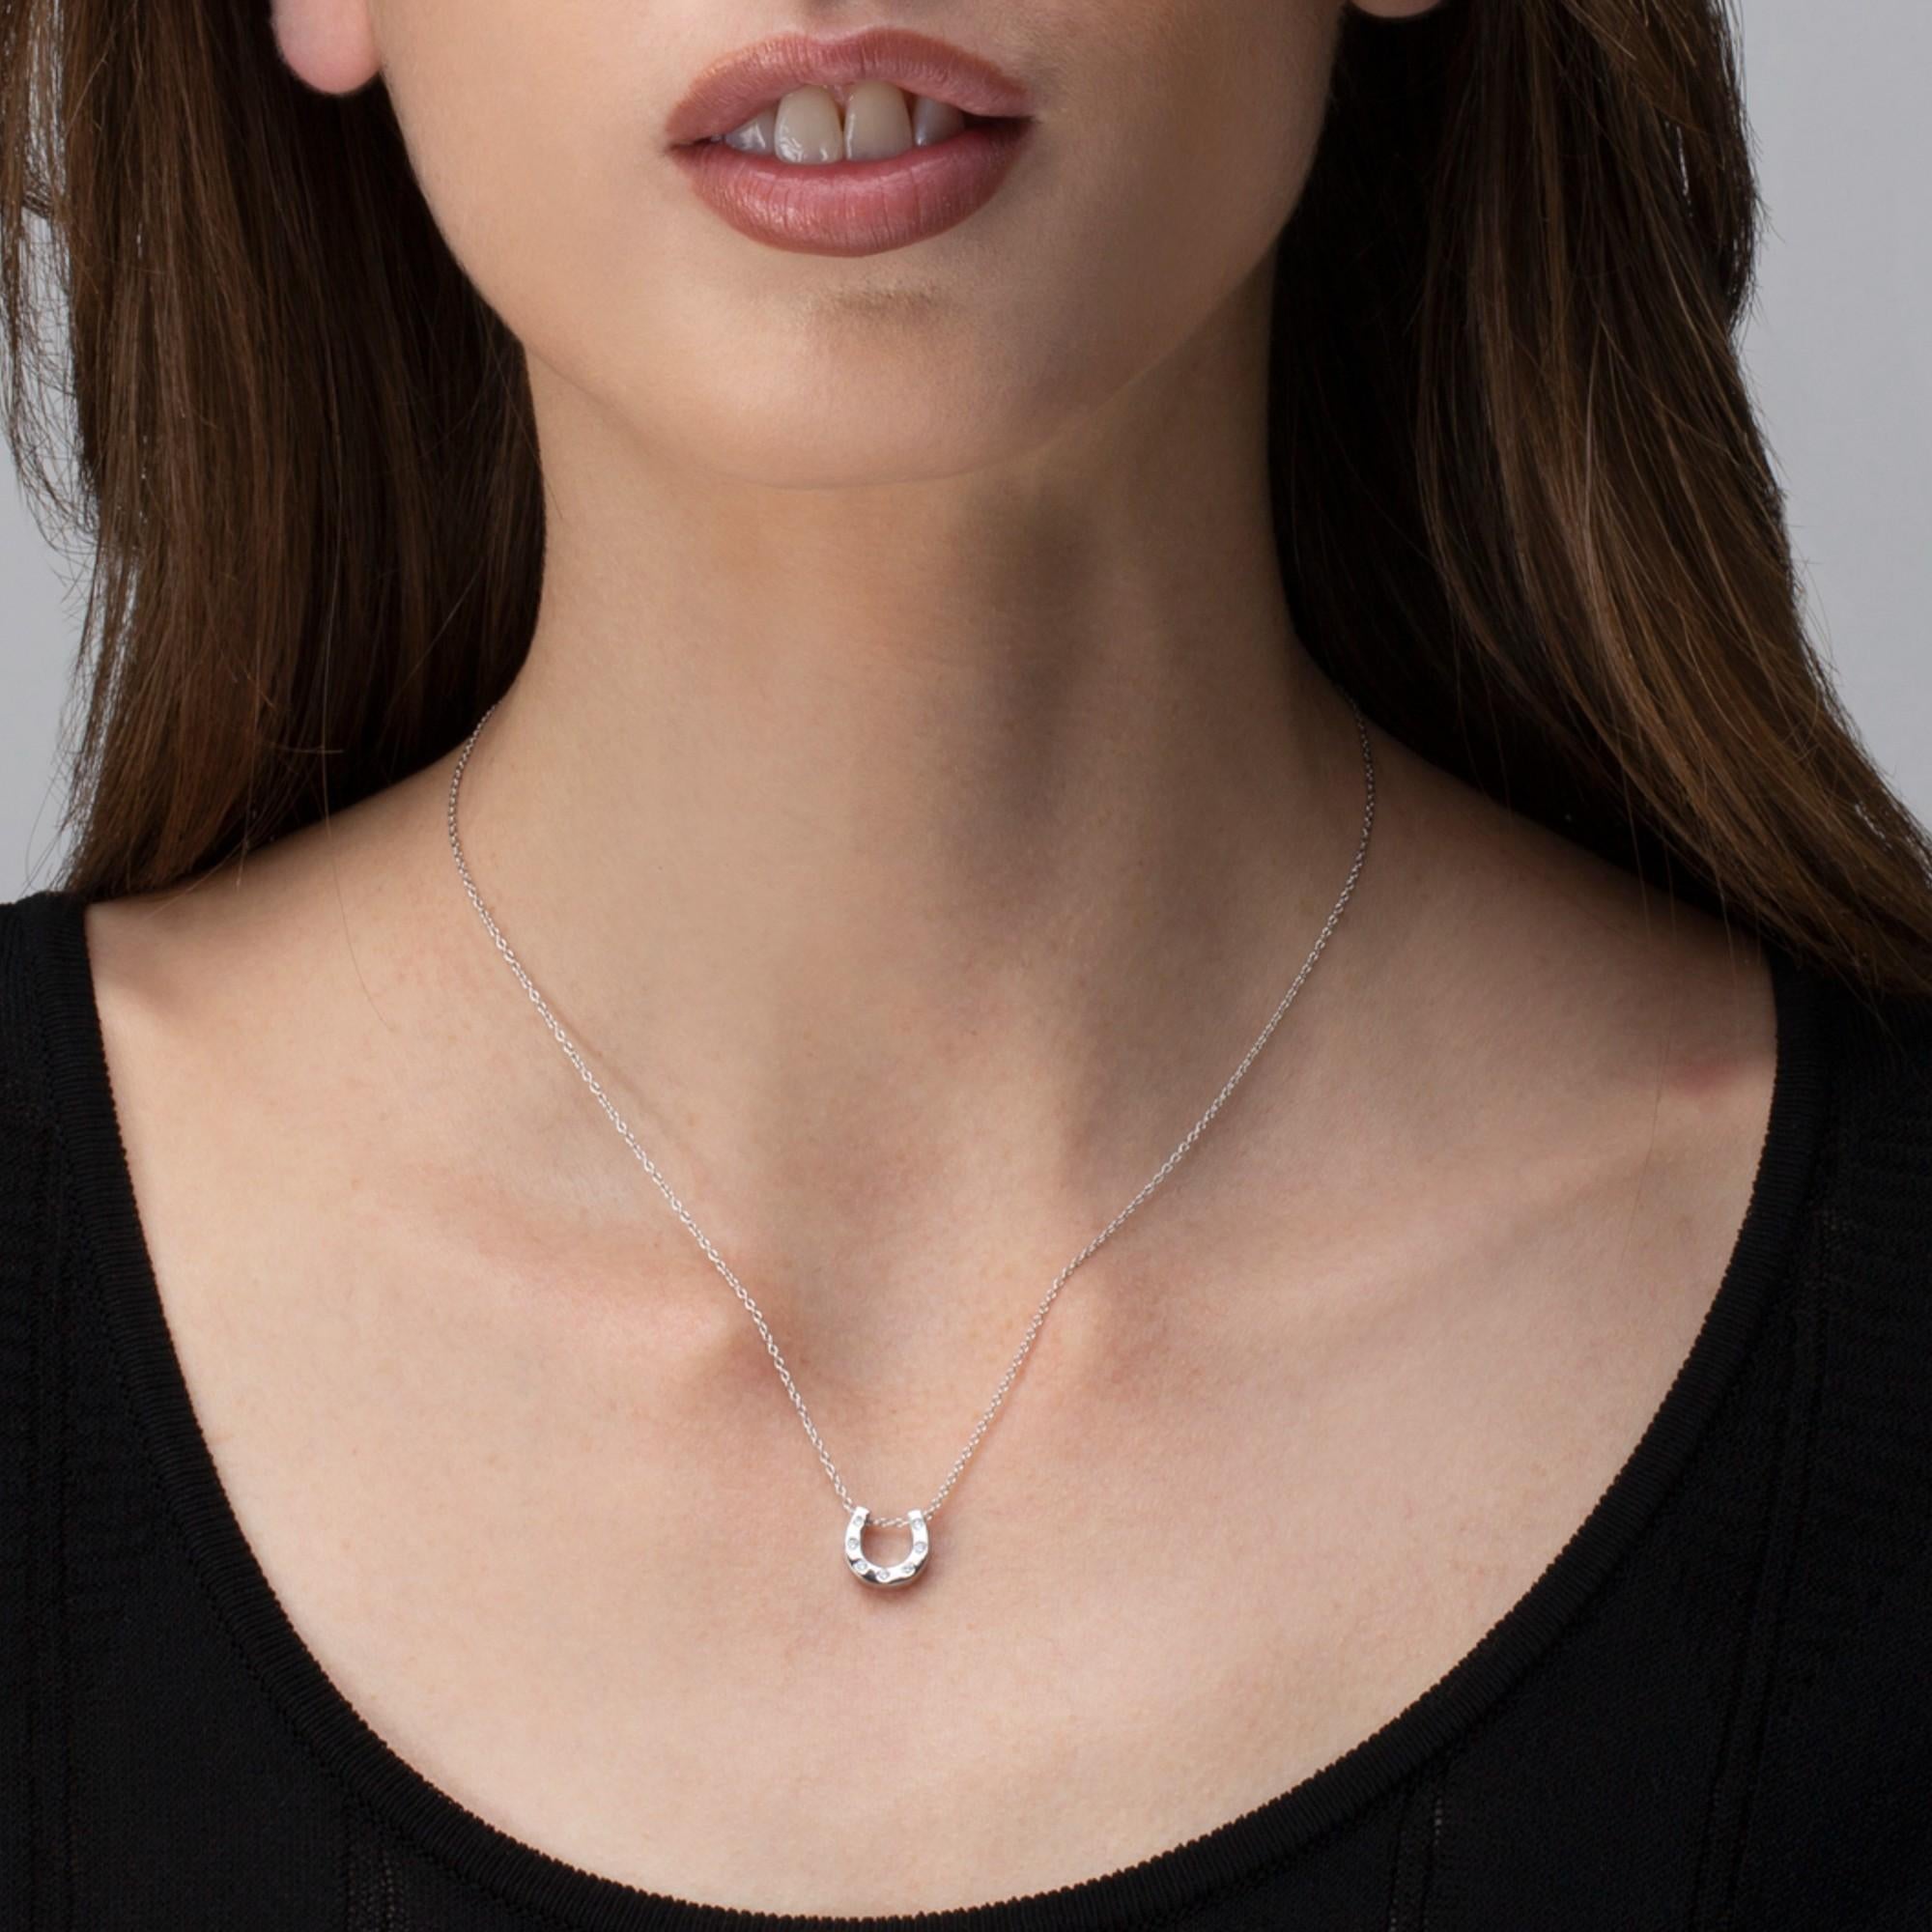 Alex Jona design collection, hand crafted in Italy, 18 carat white gold horseshoe  pendant, sliding on a 17.7 in/45 cm chain necklace. A further small ring allows to reduce the length of the chain to 16.5 in./42 cm. Marked Jona. Dimensions: 0.42 in.